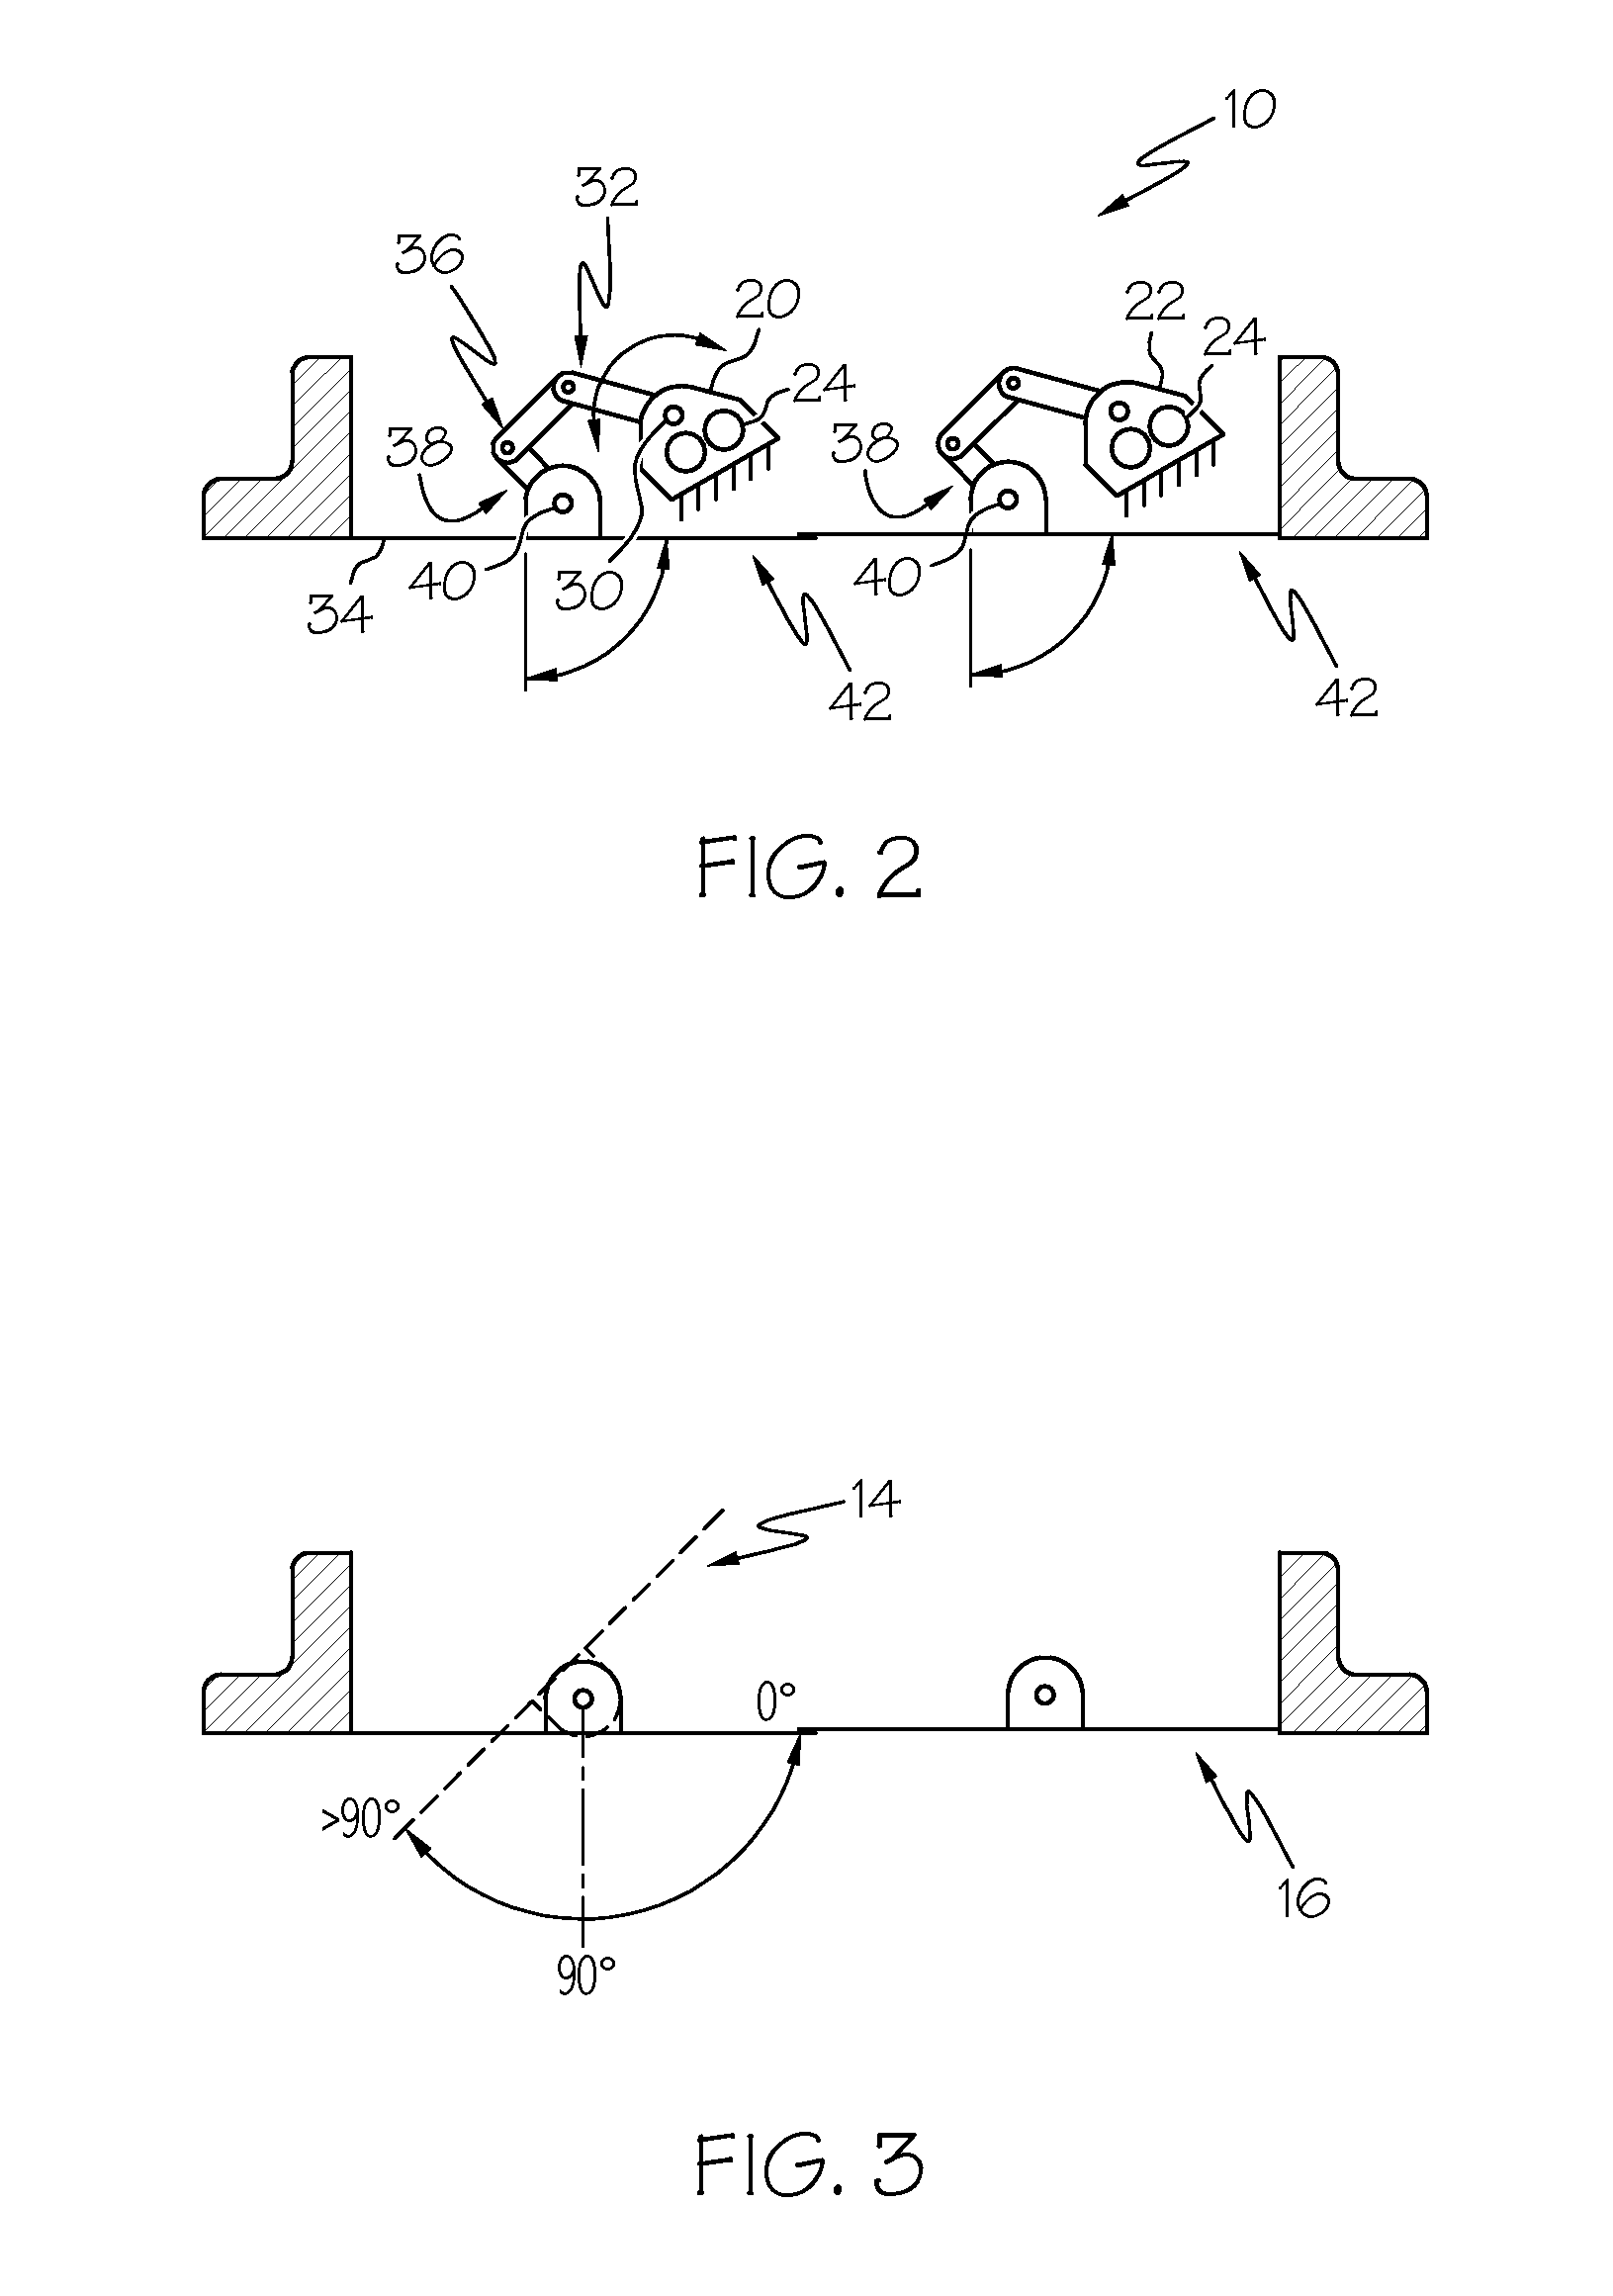 Thrust recovery, or other valve, containing two independently actuated doors and control system